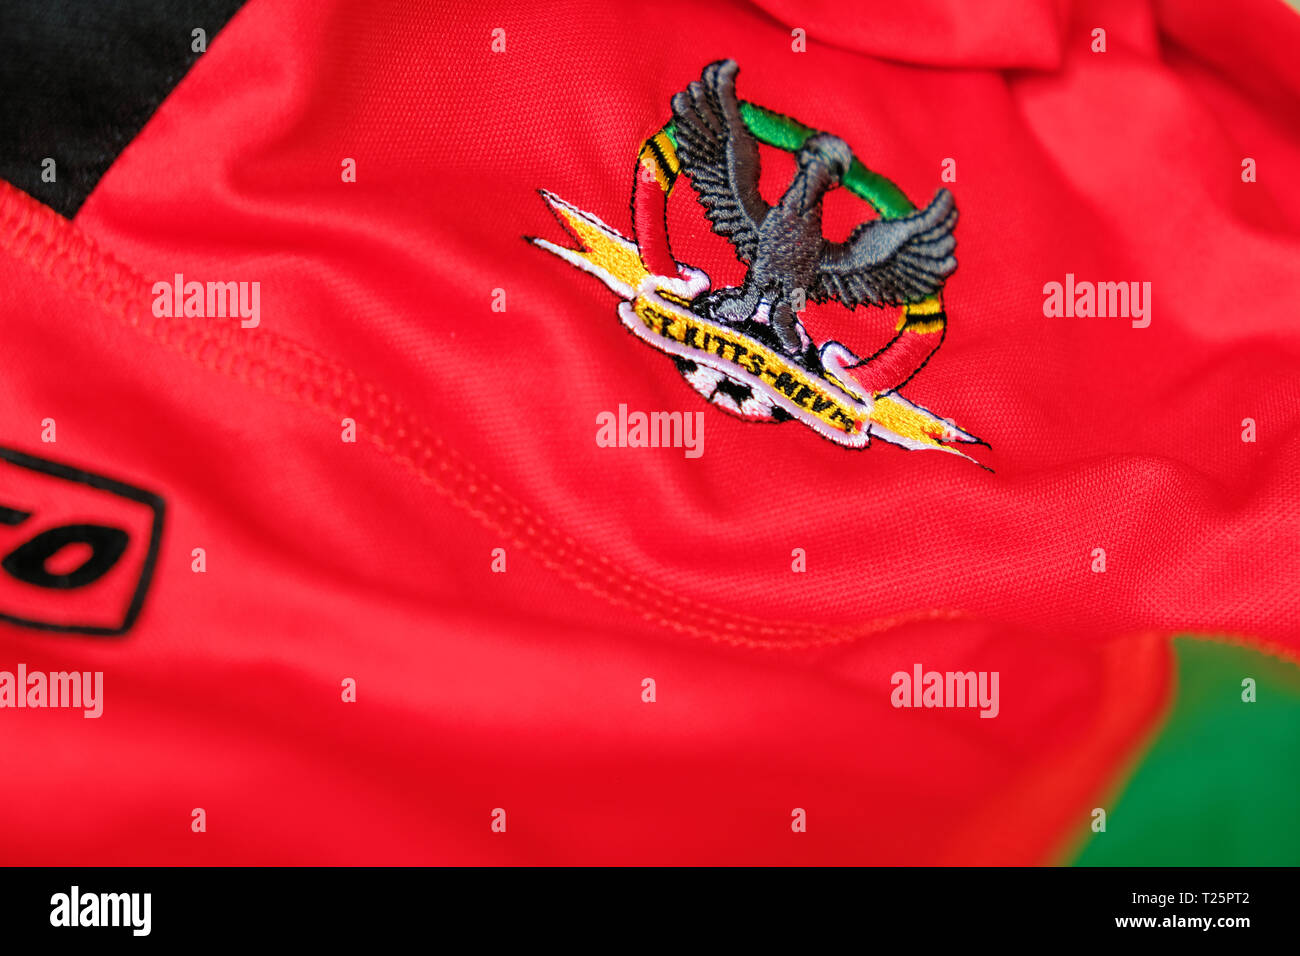 Logo on national soccer team jersey for the Saint Kitts and Nevis national football team; St. Kitts & Nevis national team kit. Stock Photo